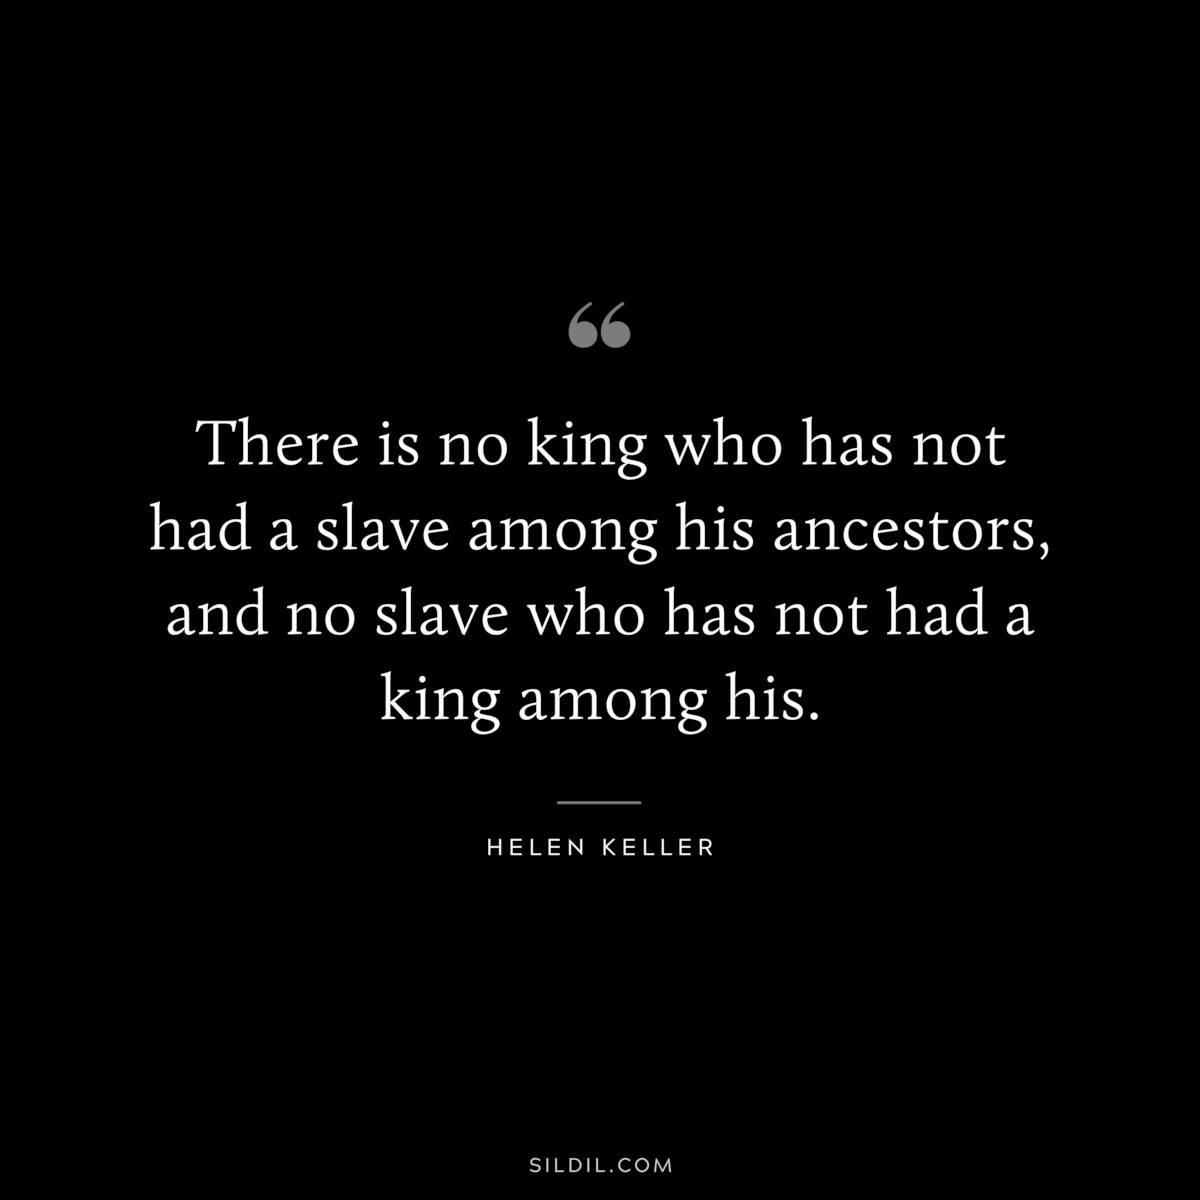 There is no king who has not had a slave among his ancestors, and no slave who has not had a king among his. ― Helen Keller